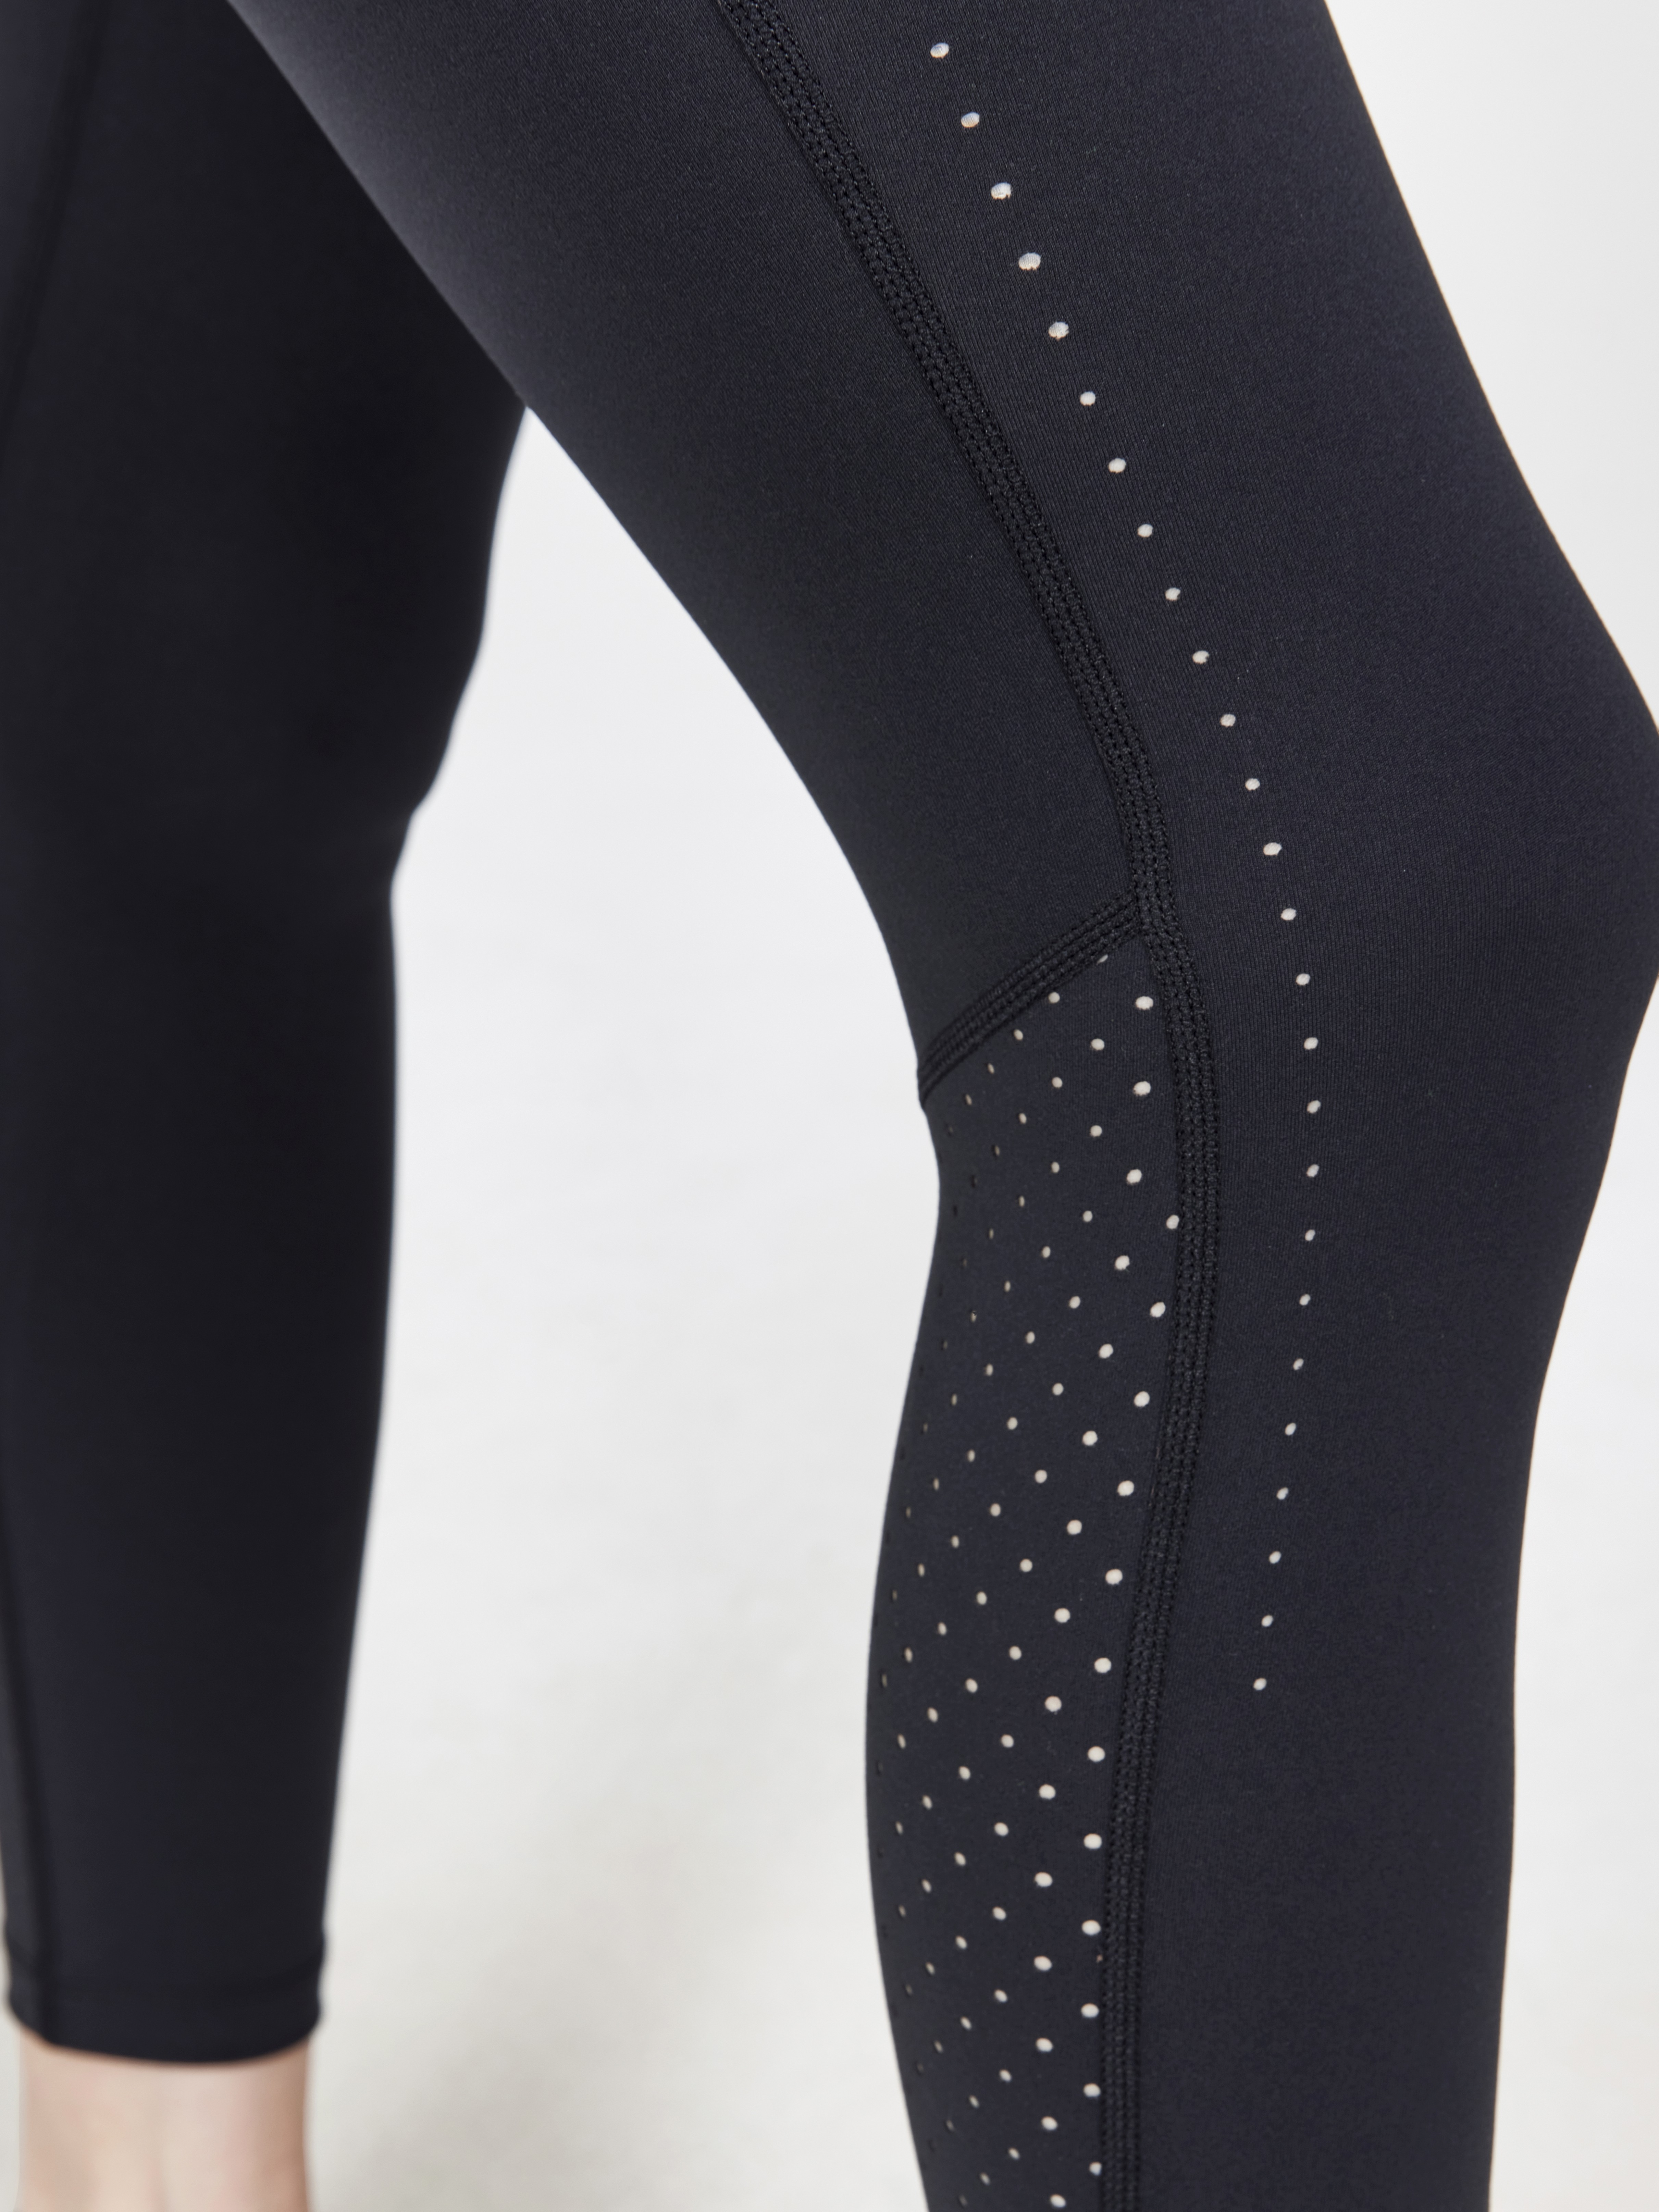 https://craft-products-production.imgix.net/images/1966_57a61467a3-1910507-999999_adv-essence-perforated-tights-w_closeup3-original.jpg